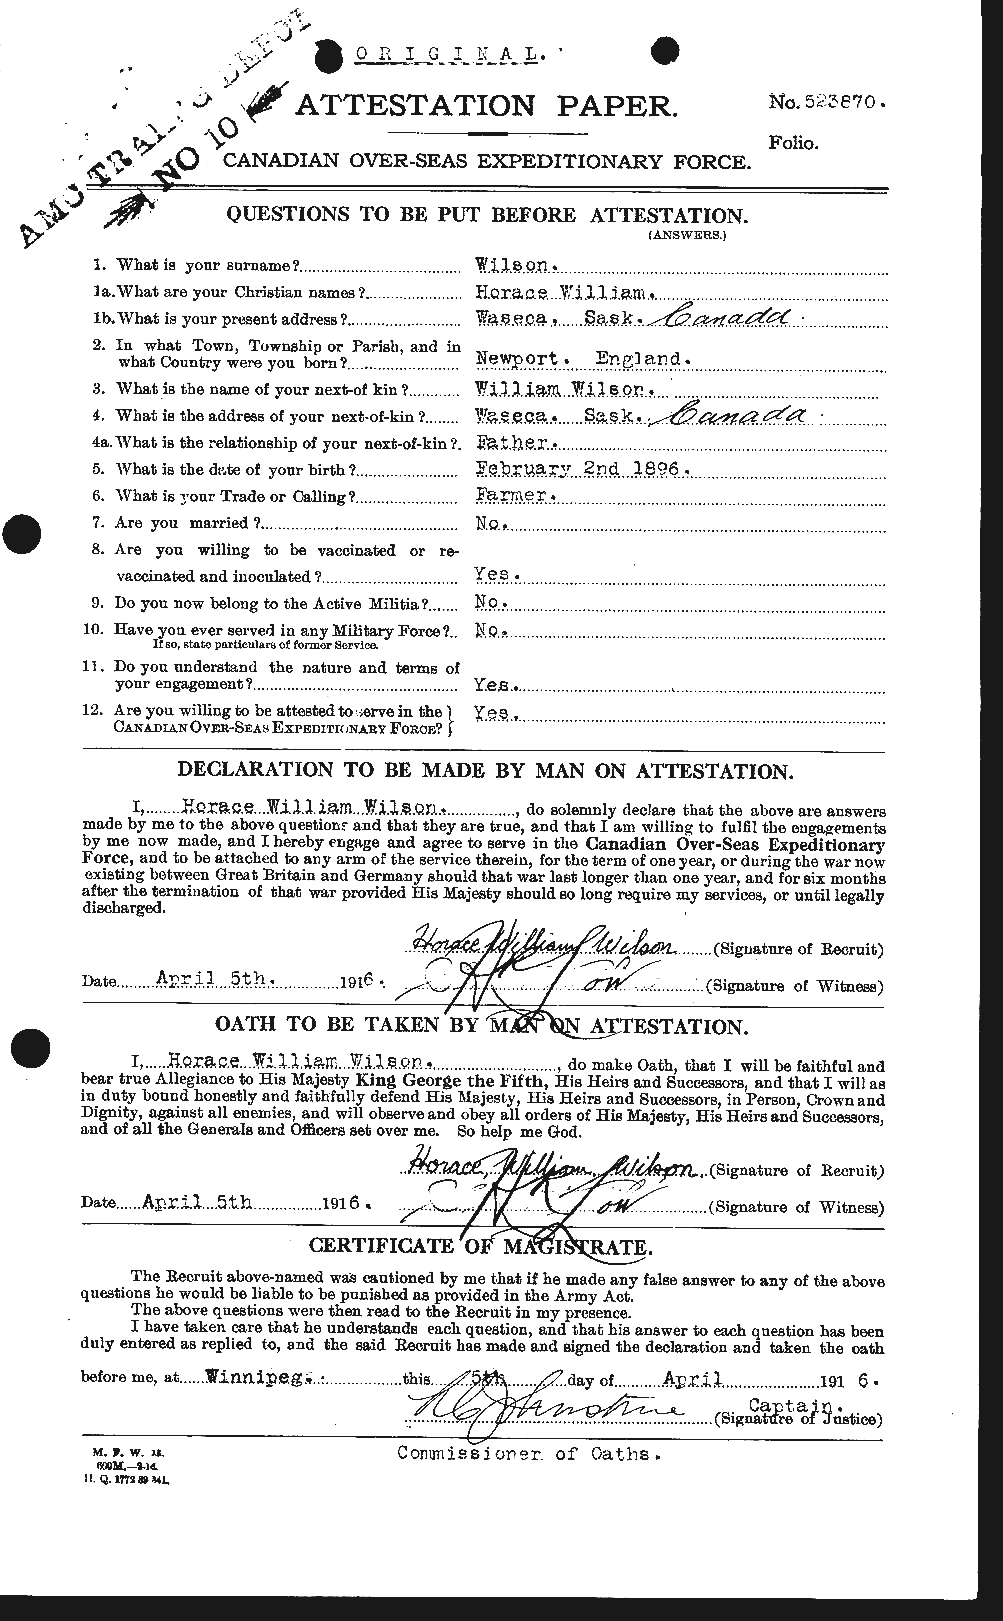 Personnel Records of the First World War - CEF 679588a